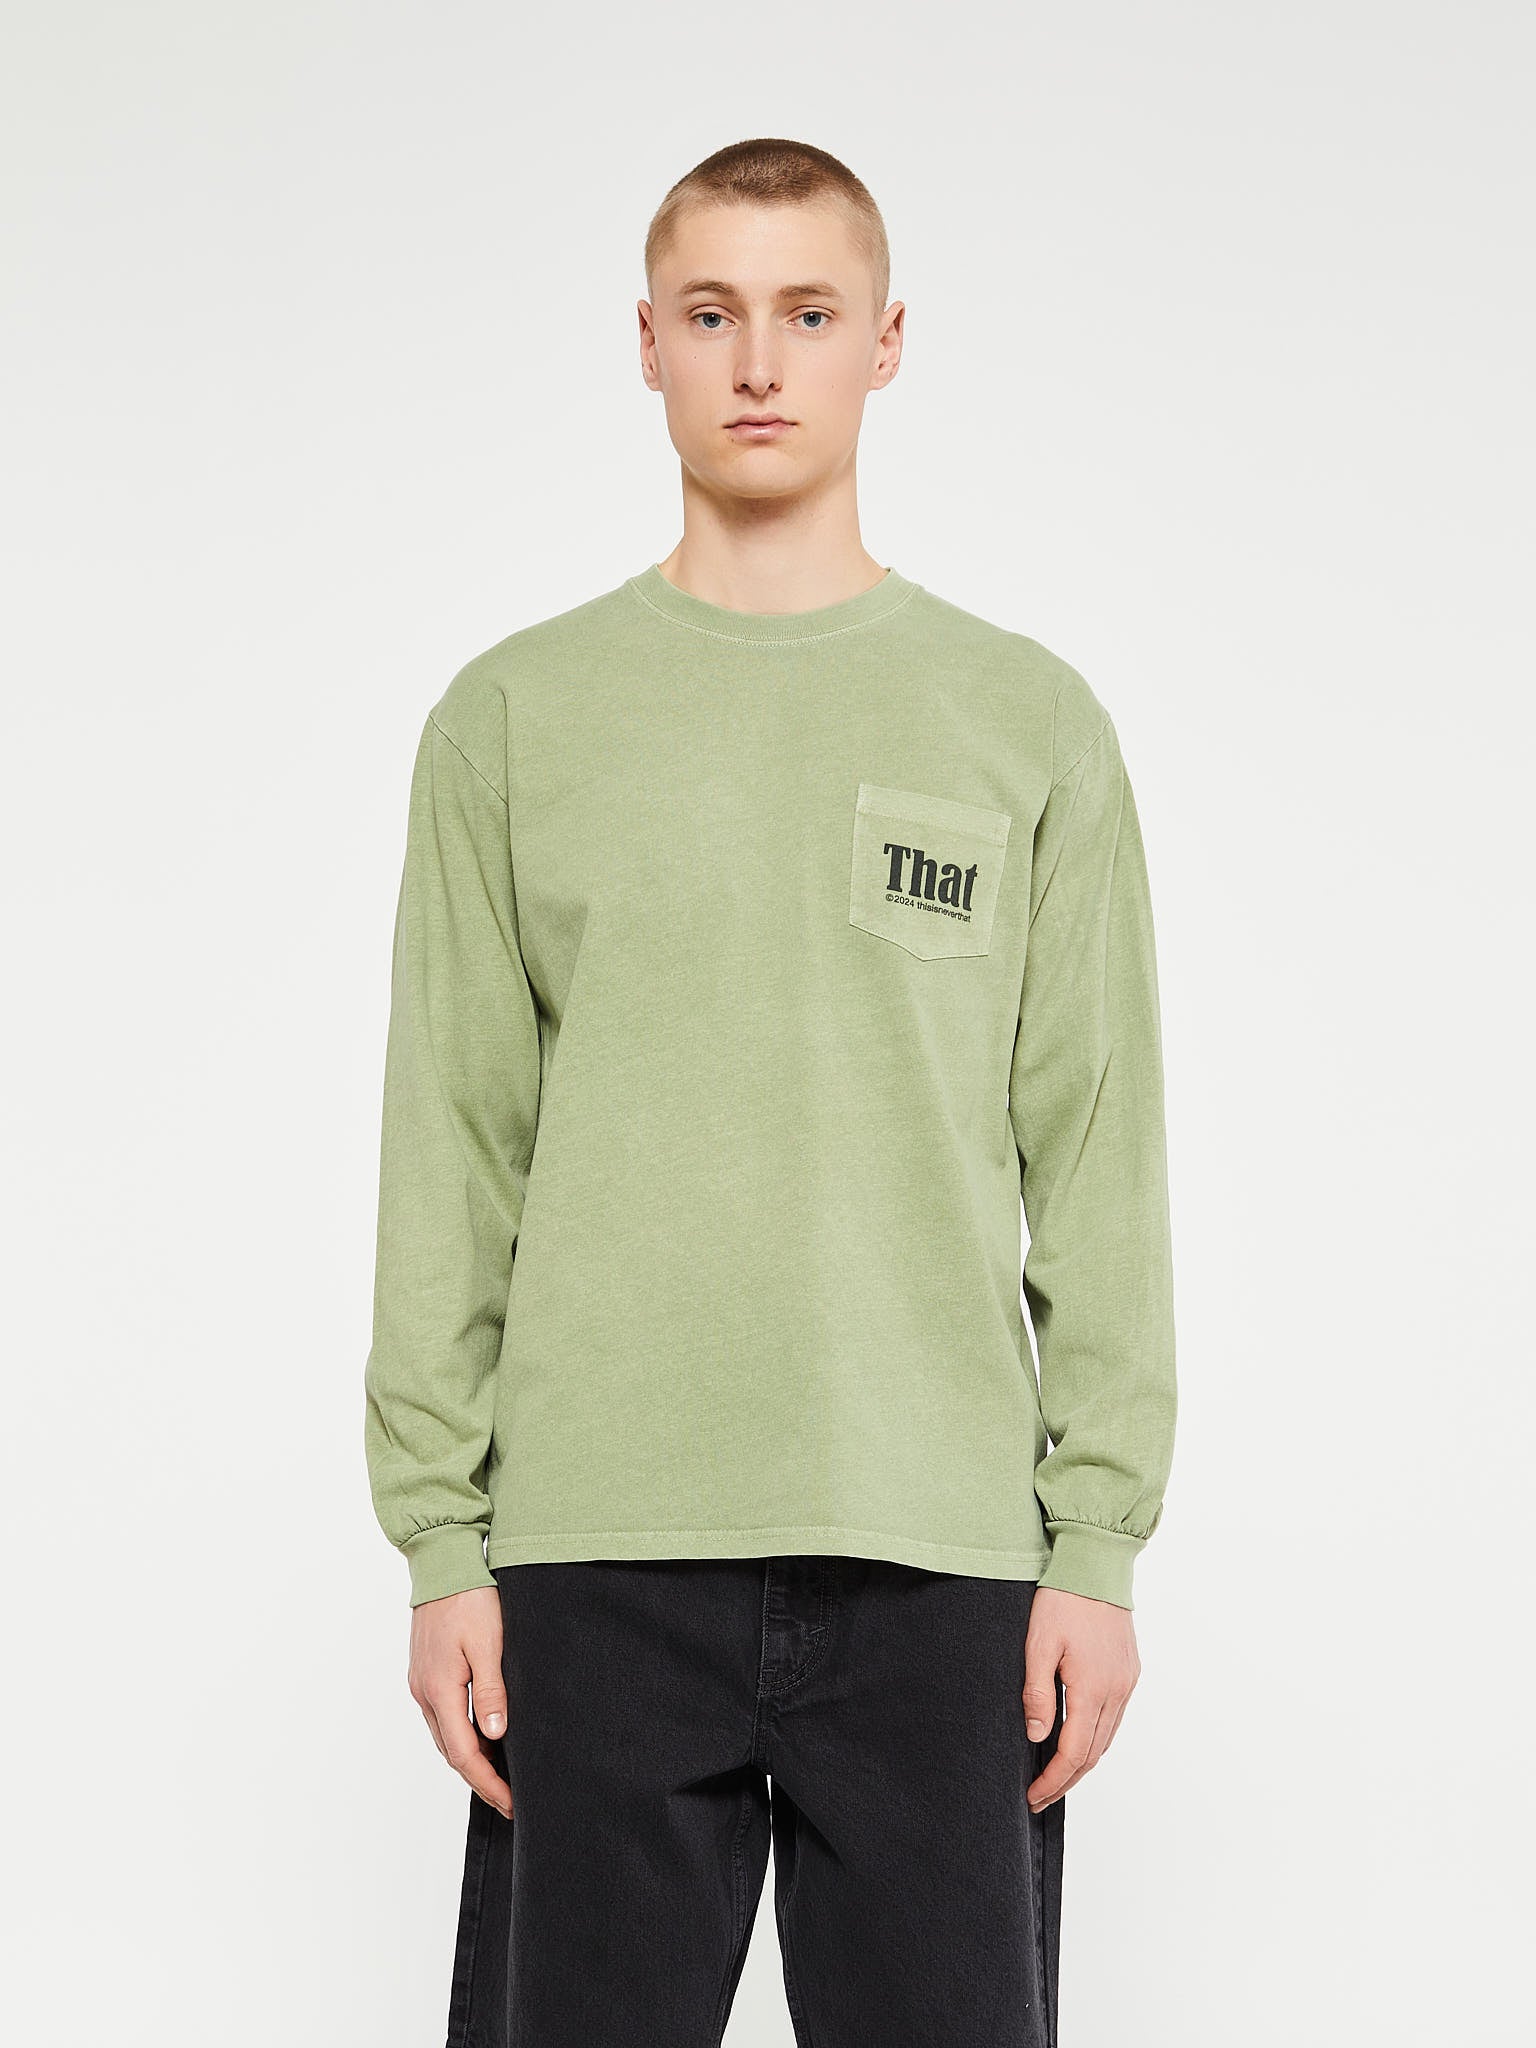 Thisisneverthat - That Pocket Longsleeved T-Shirt in Green